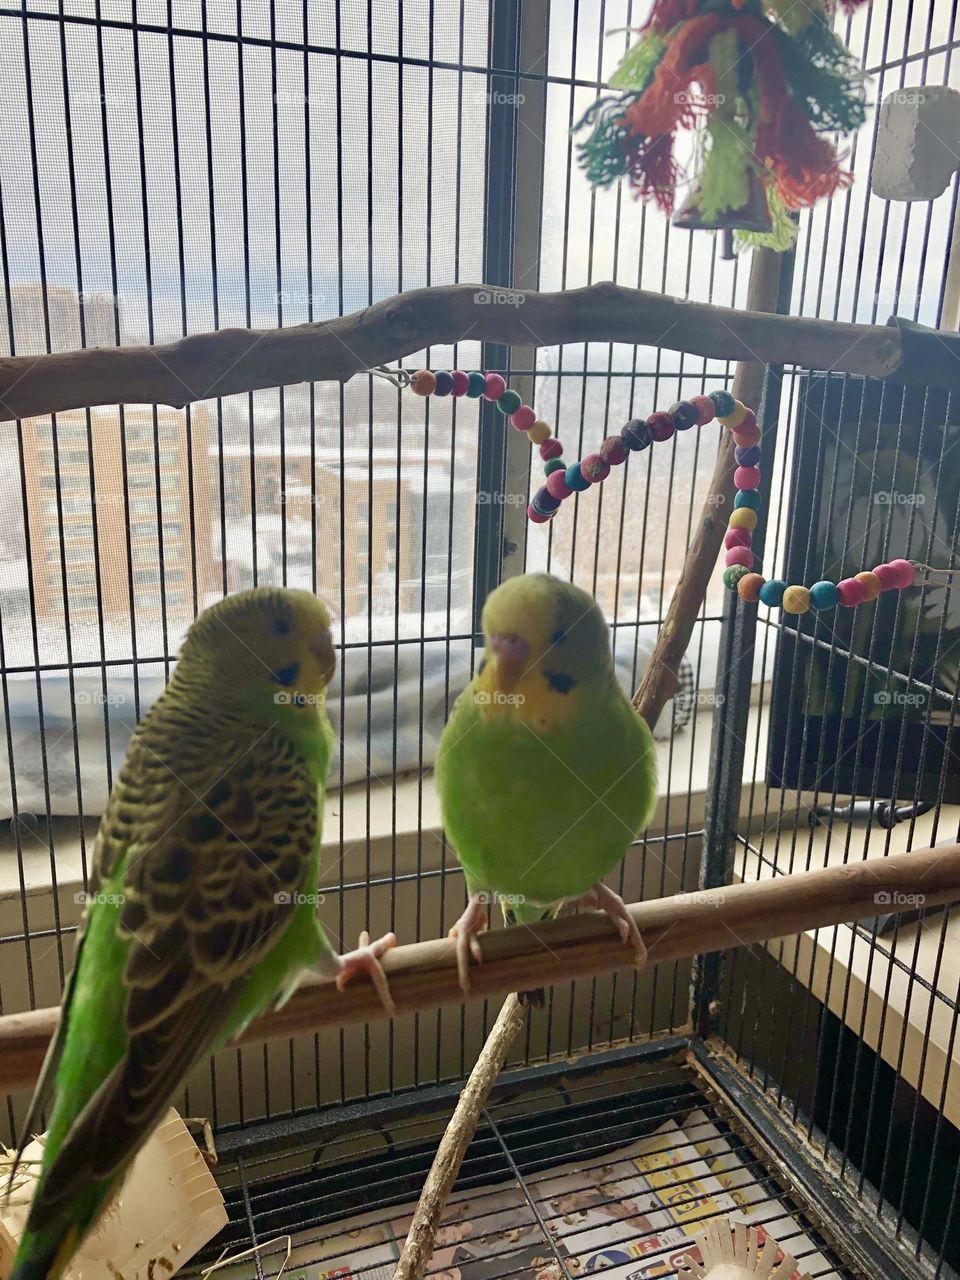 Chill time in the cage Kiwi and Coco together 